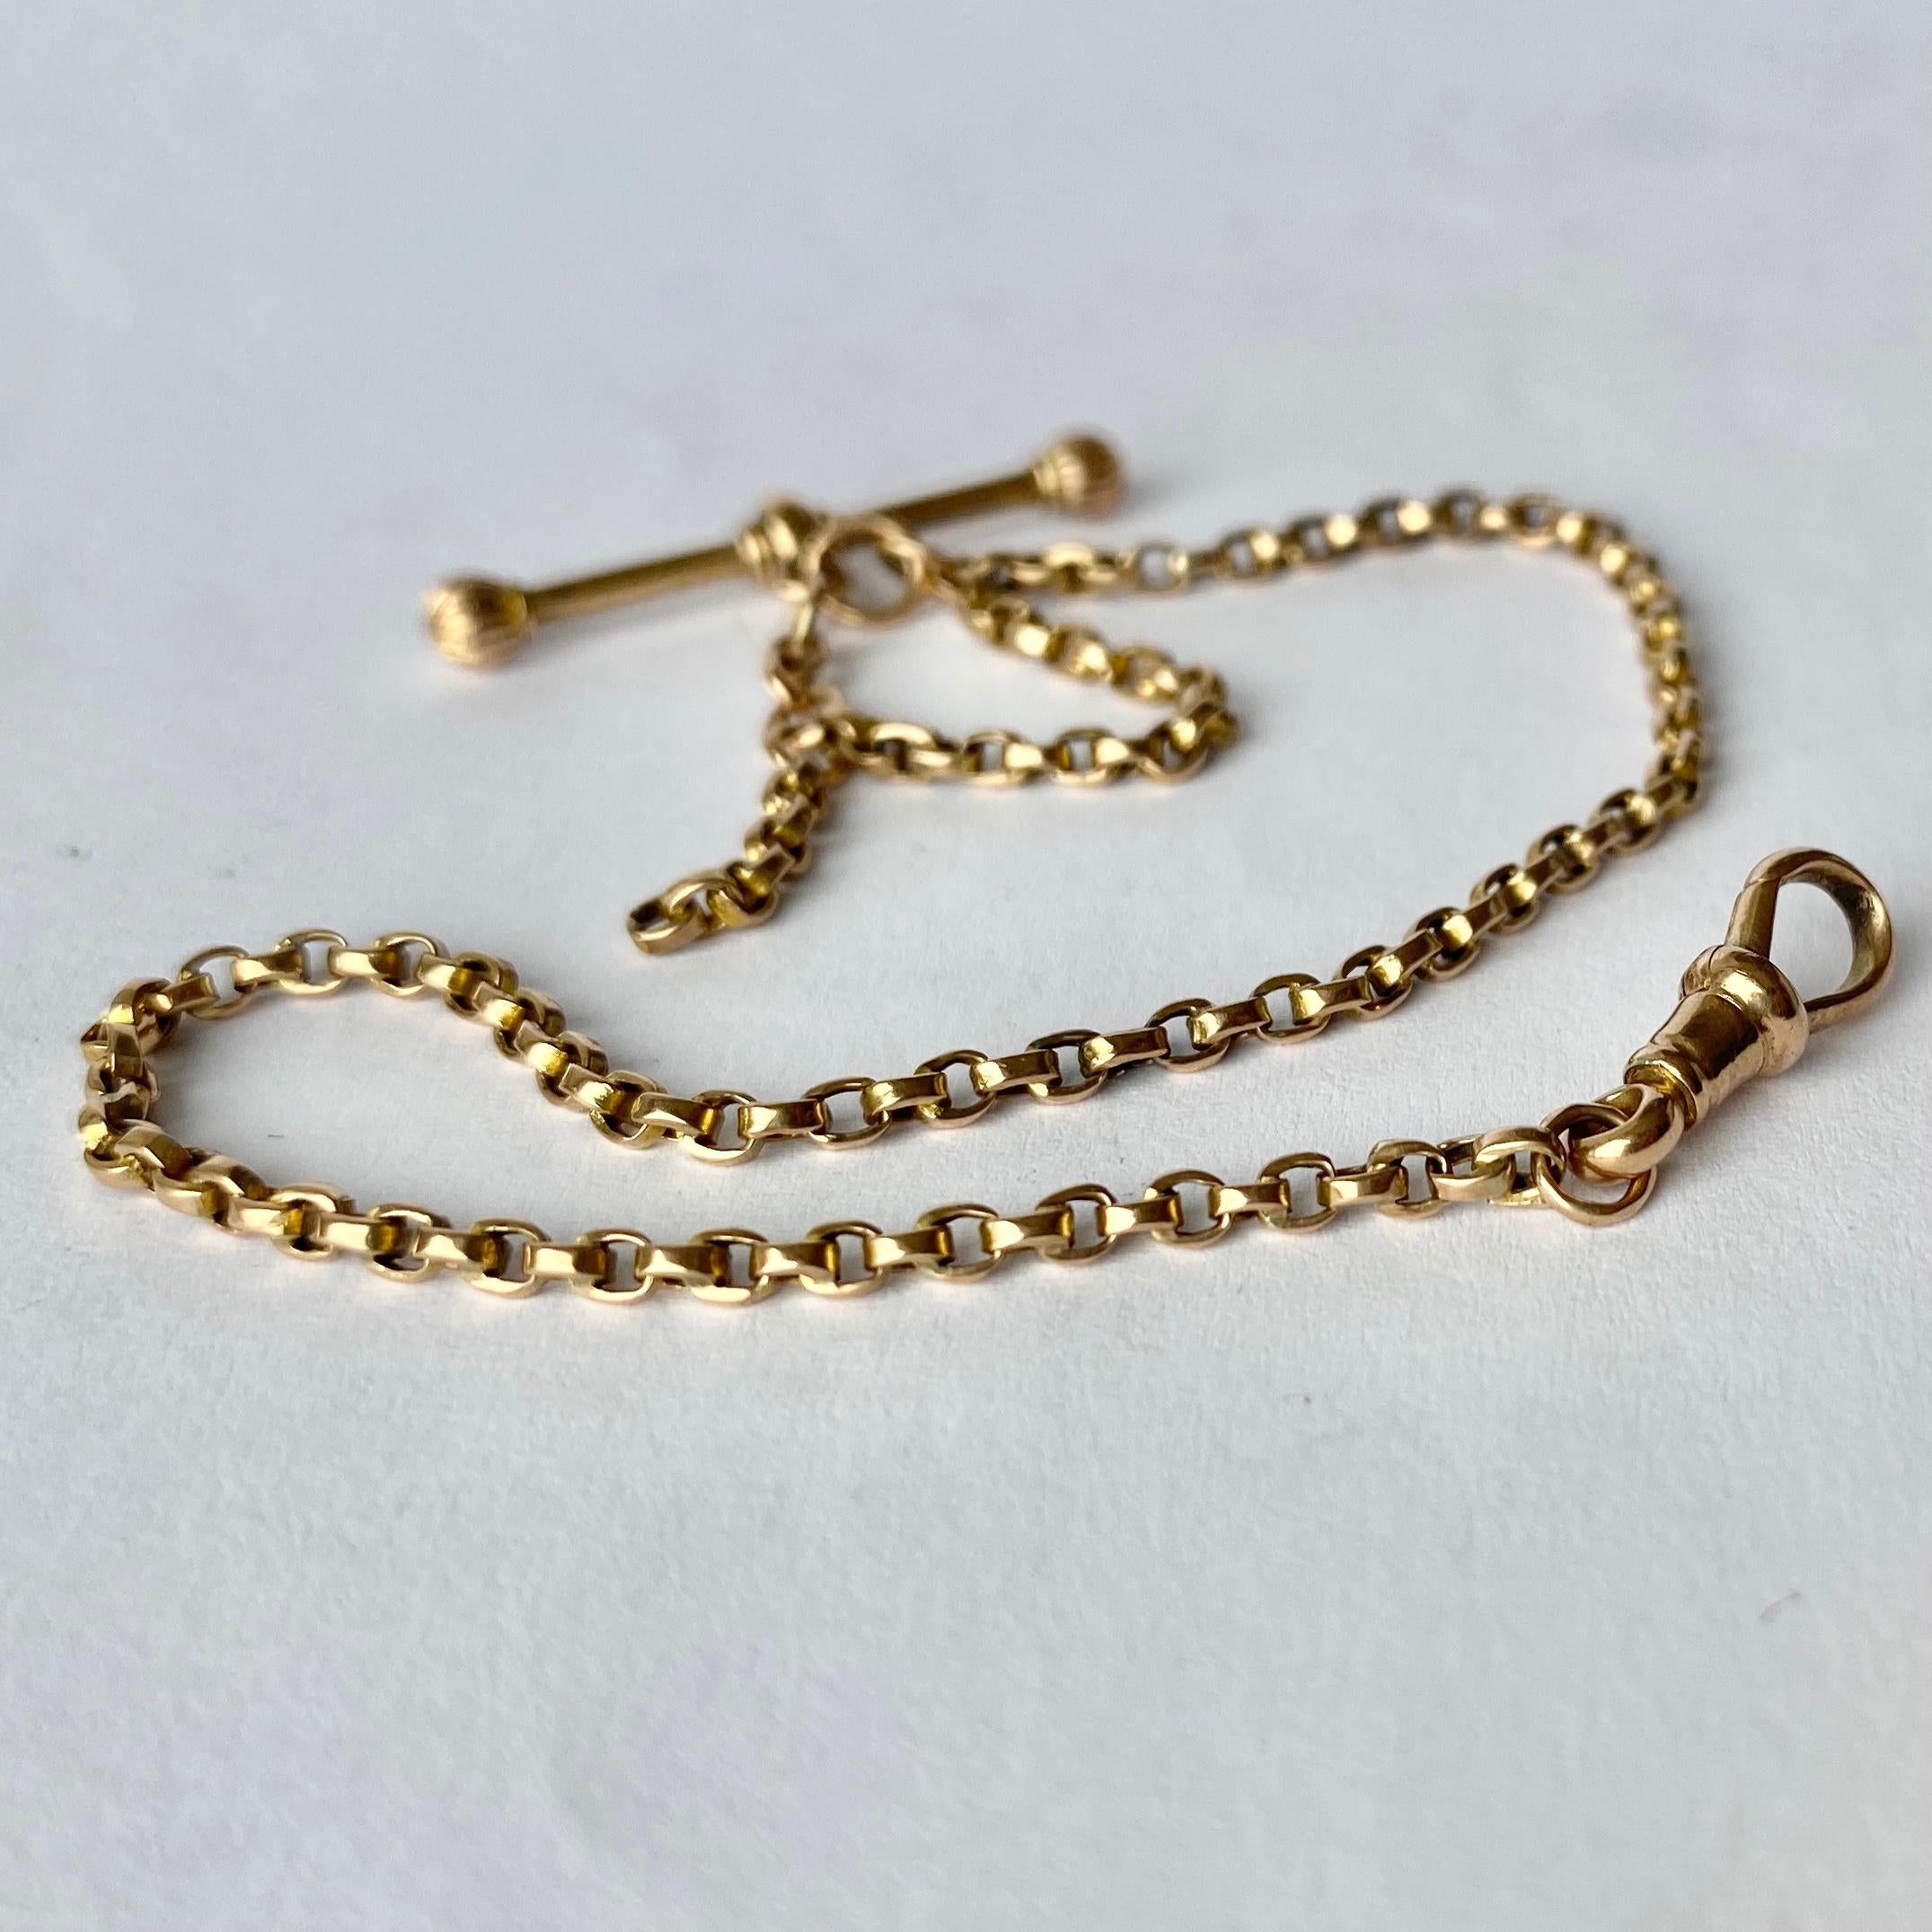 This lovely bracelet is made up of simple links and is fastened with a dog clip ad alohas a t bar. Modelled out of 9ct gold and made in England.

Bracelet Length: 19cm
Chain Width: 2mm

Weight: 4.9g